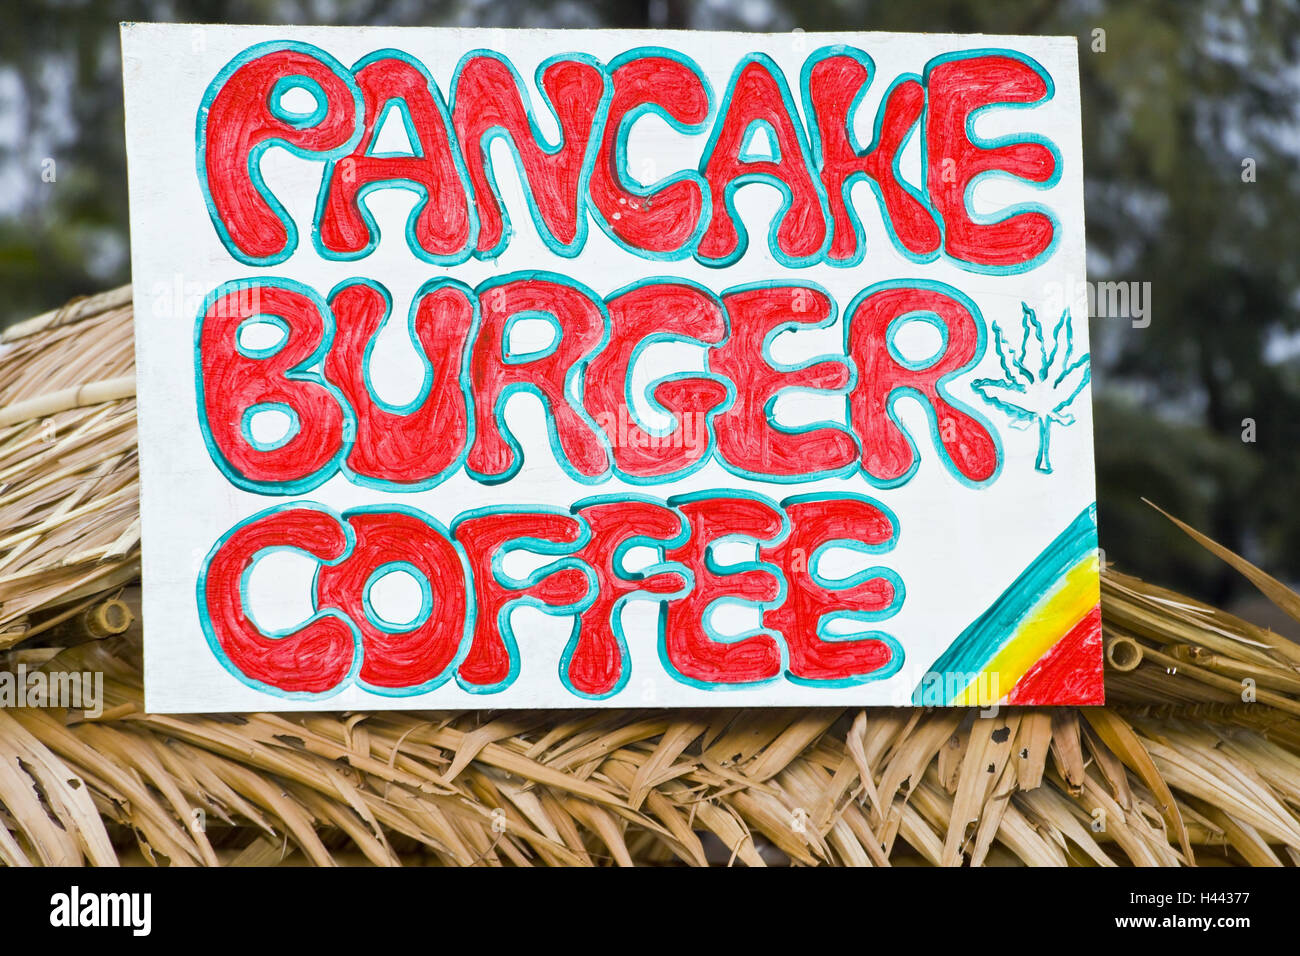 Snack, sign, detail, Thailand, beach, Runable aground, bar, bar, snack stall, Asia, outside, South-East Asia, destination, tourism, Pancake, Burger, Coffe, offer, atypical, radiant, red, brightly, Stock Photo